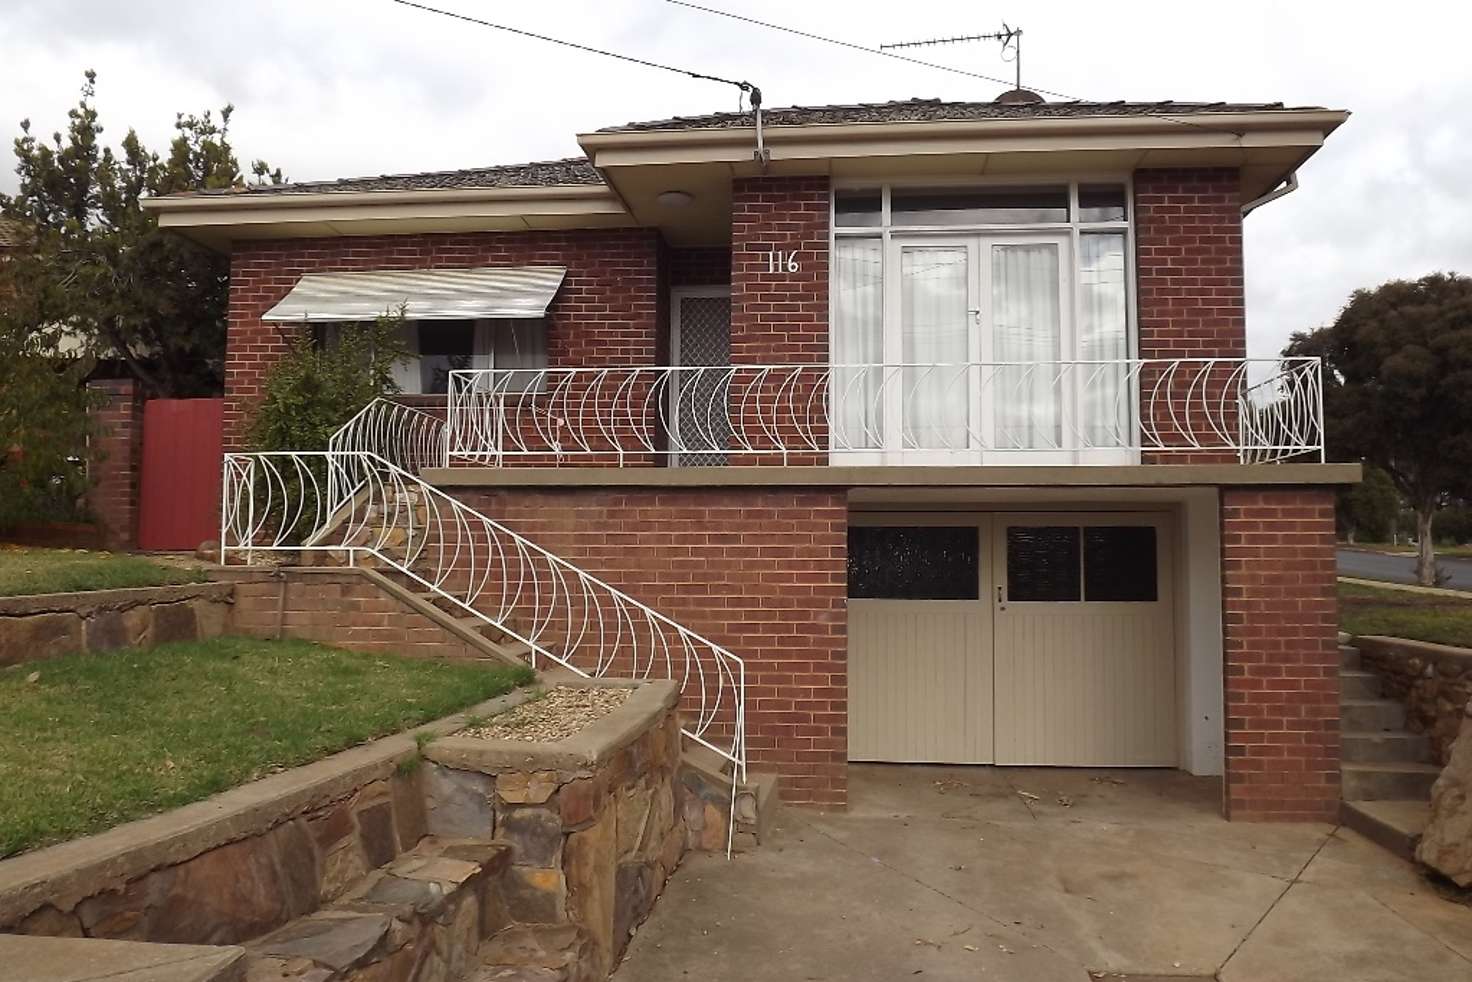 Main view of Homely house listing, 116 Ashmont Ave, Ashmont NSW 2650